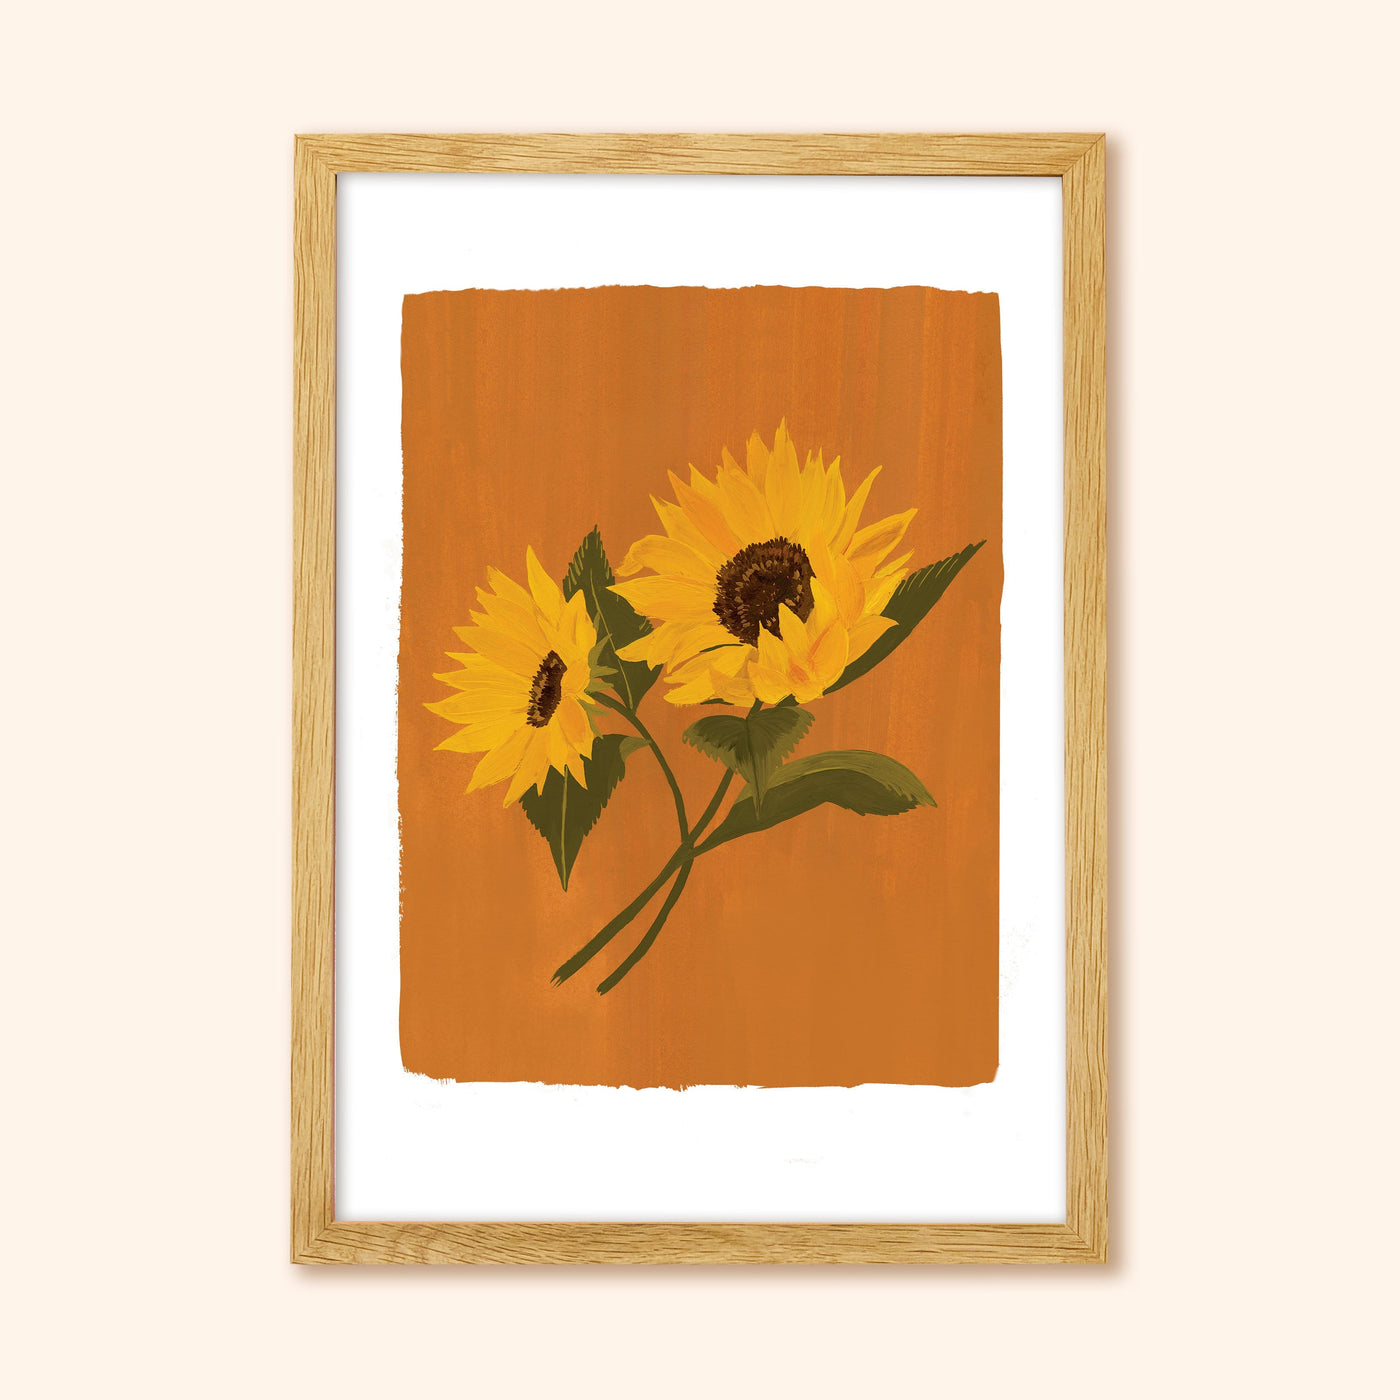 A Botanical Print Of Two Sunflowers On A Burnt Orange Background In A Light Oak Frame - Annie Dornan Smith